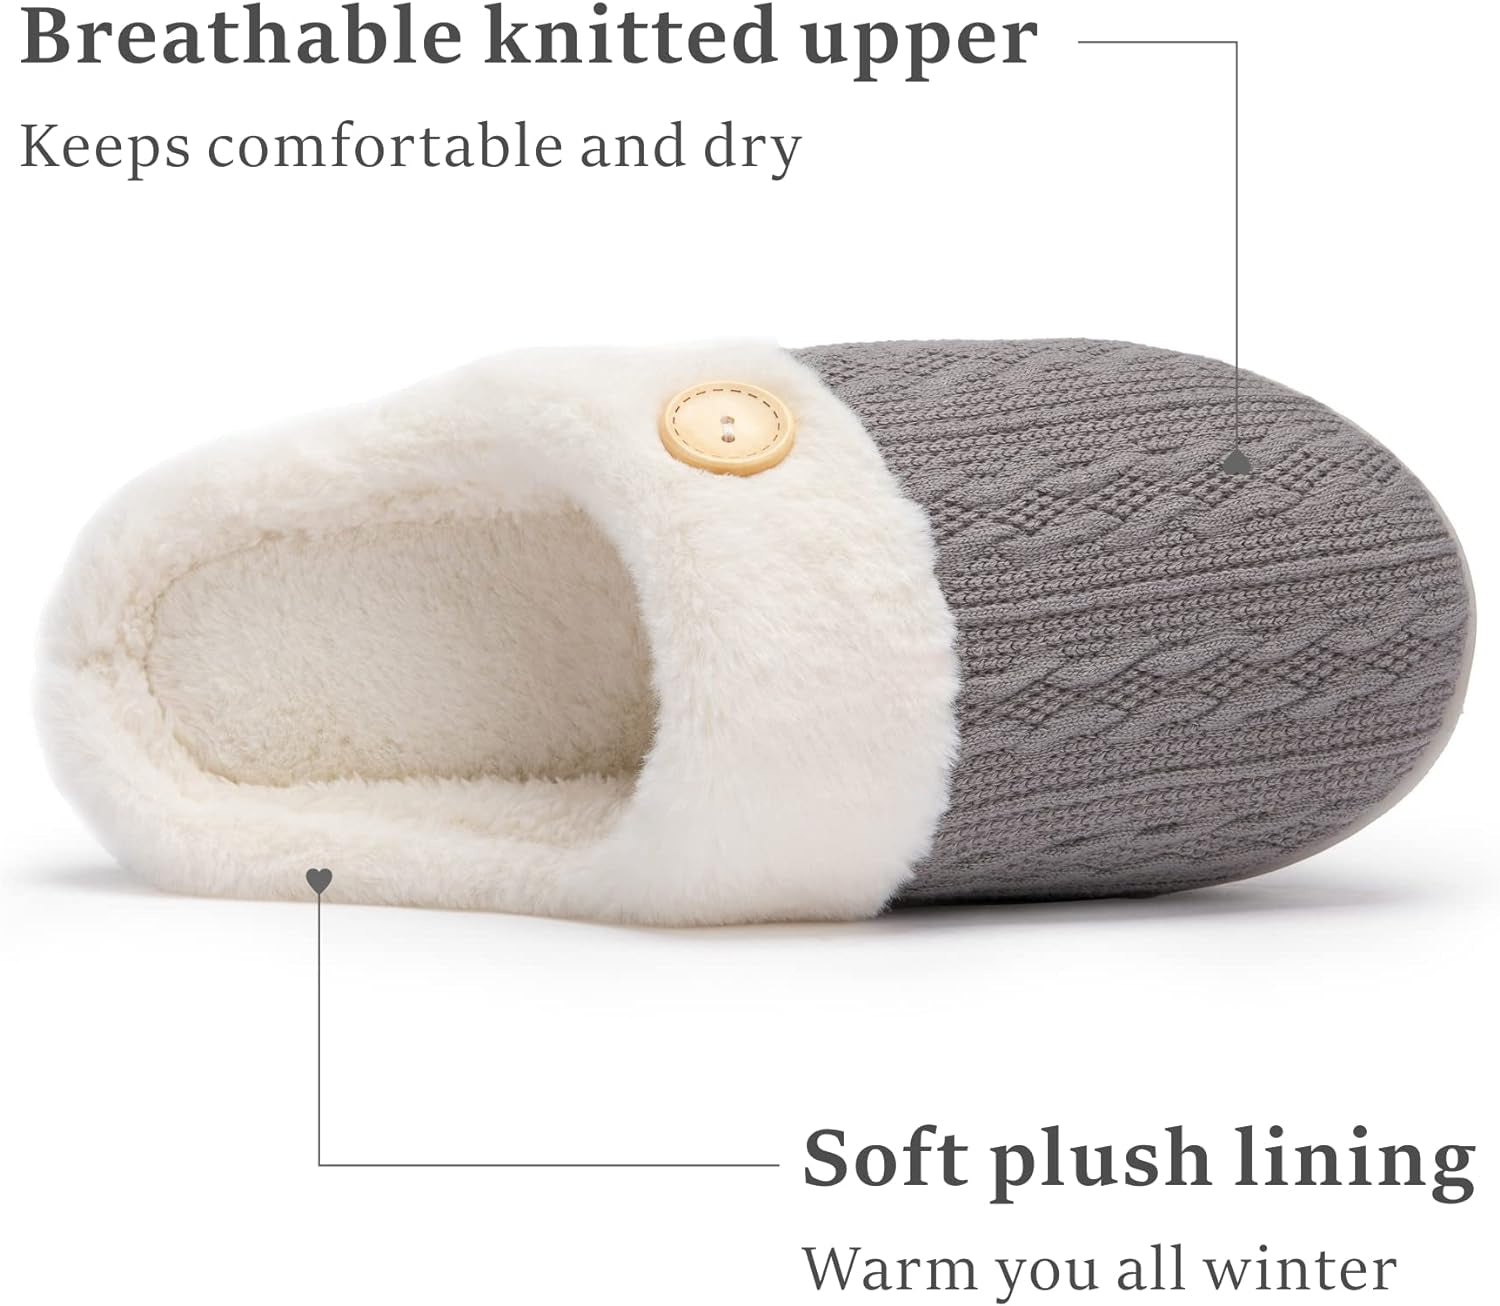 Womens Slipper Warm Comfy Memory Foam House Slippers Knitted Shoes Faux Fur Lined Anti-Skid Rubber Sole Bedroom Cozy Indoor Outdoor Slippers